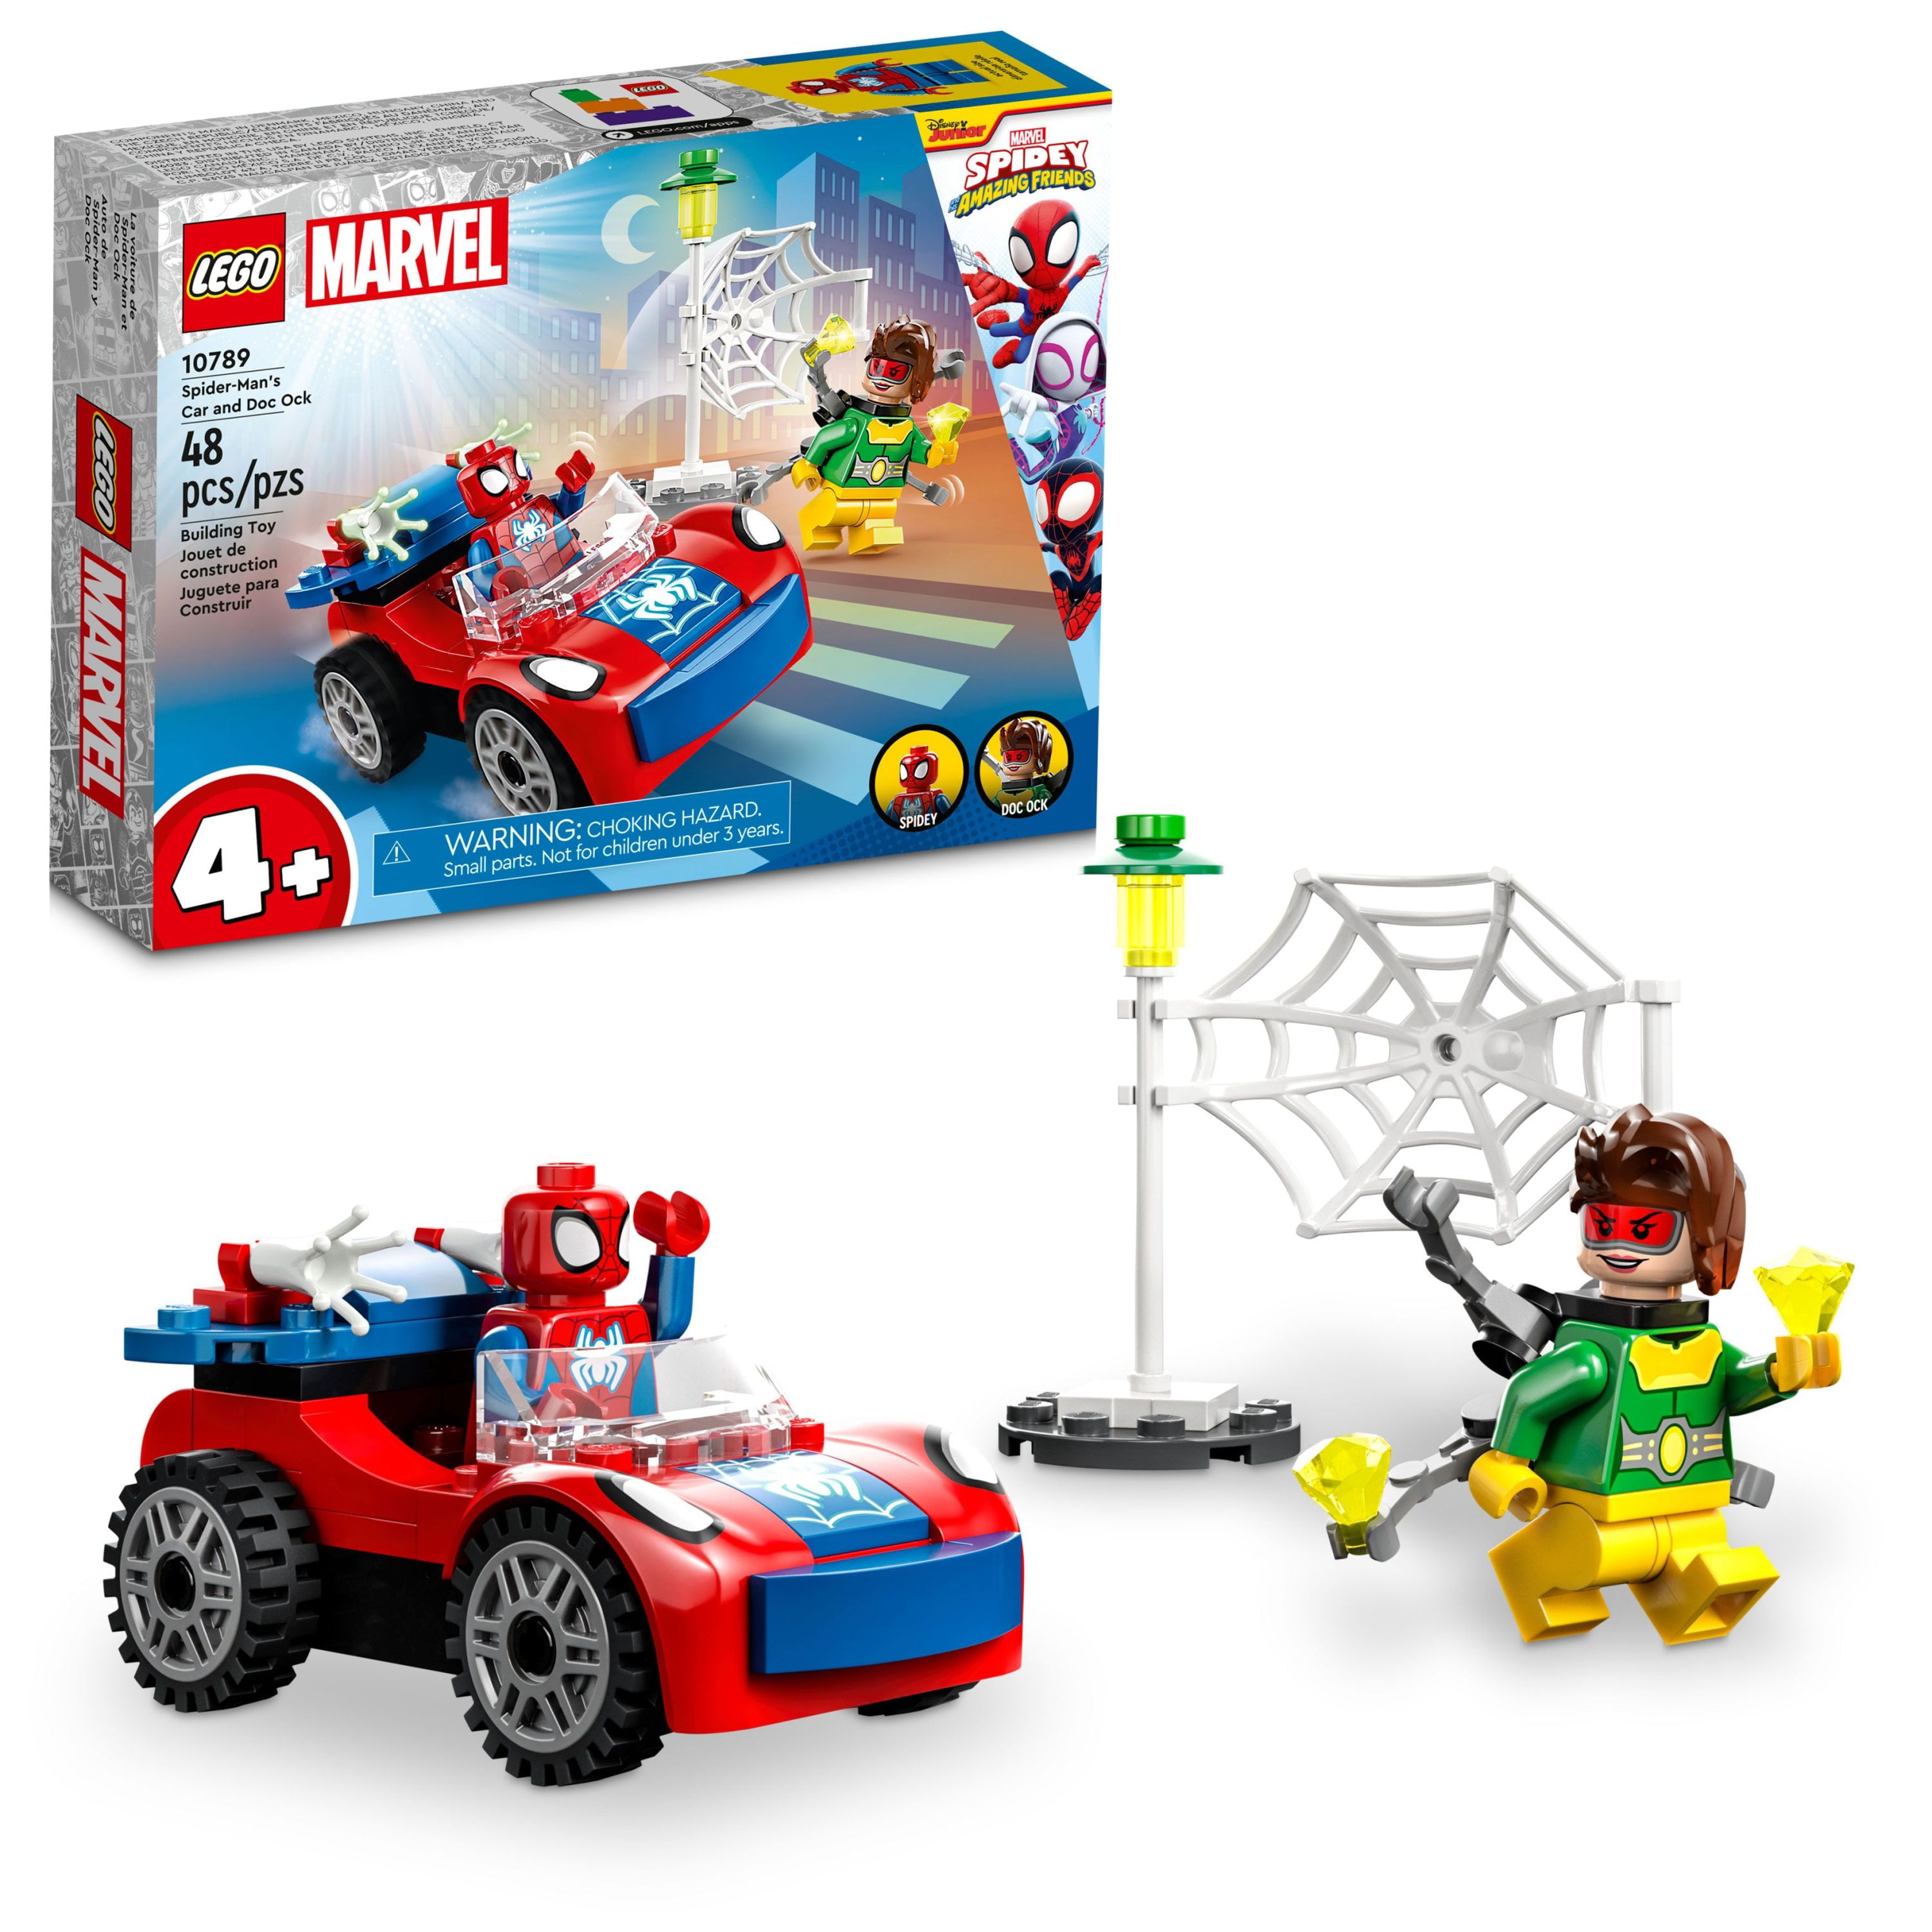 LEGO Marvel Spider-Man 76226 Building Toy - Fully Articulated Action  Figure, Superhero Movie Inspired Set with Web Elements, Gift for  Grandchildren